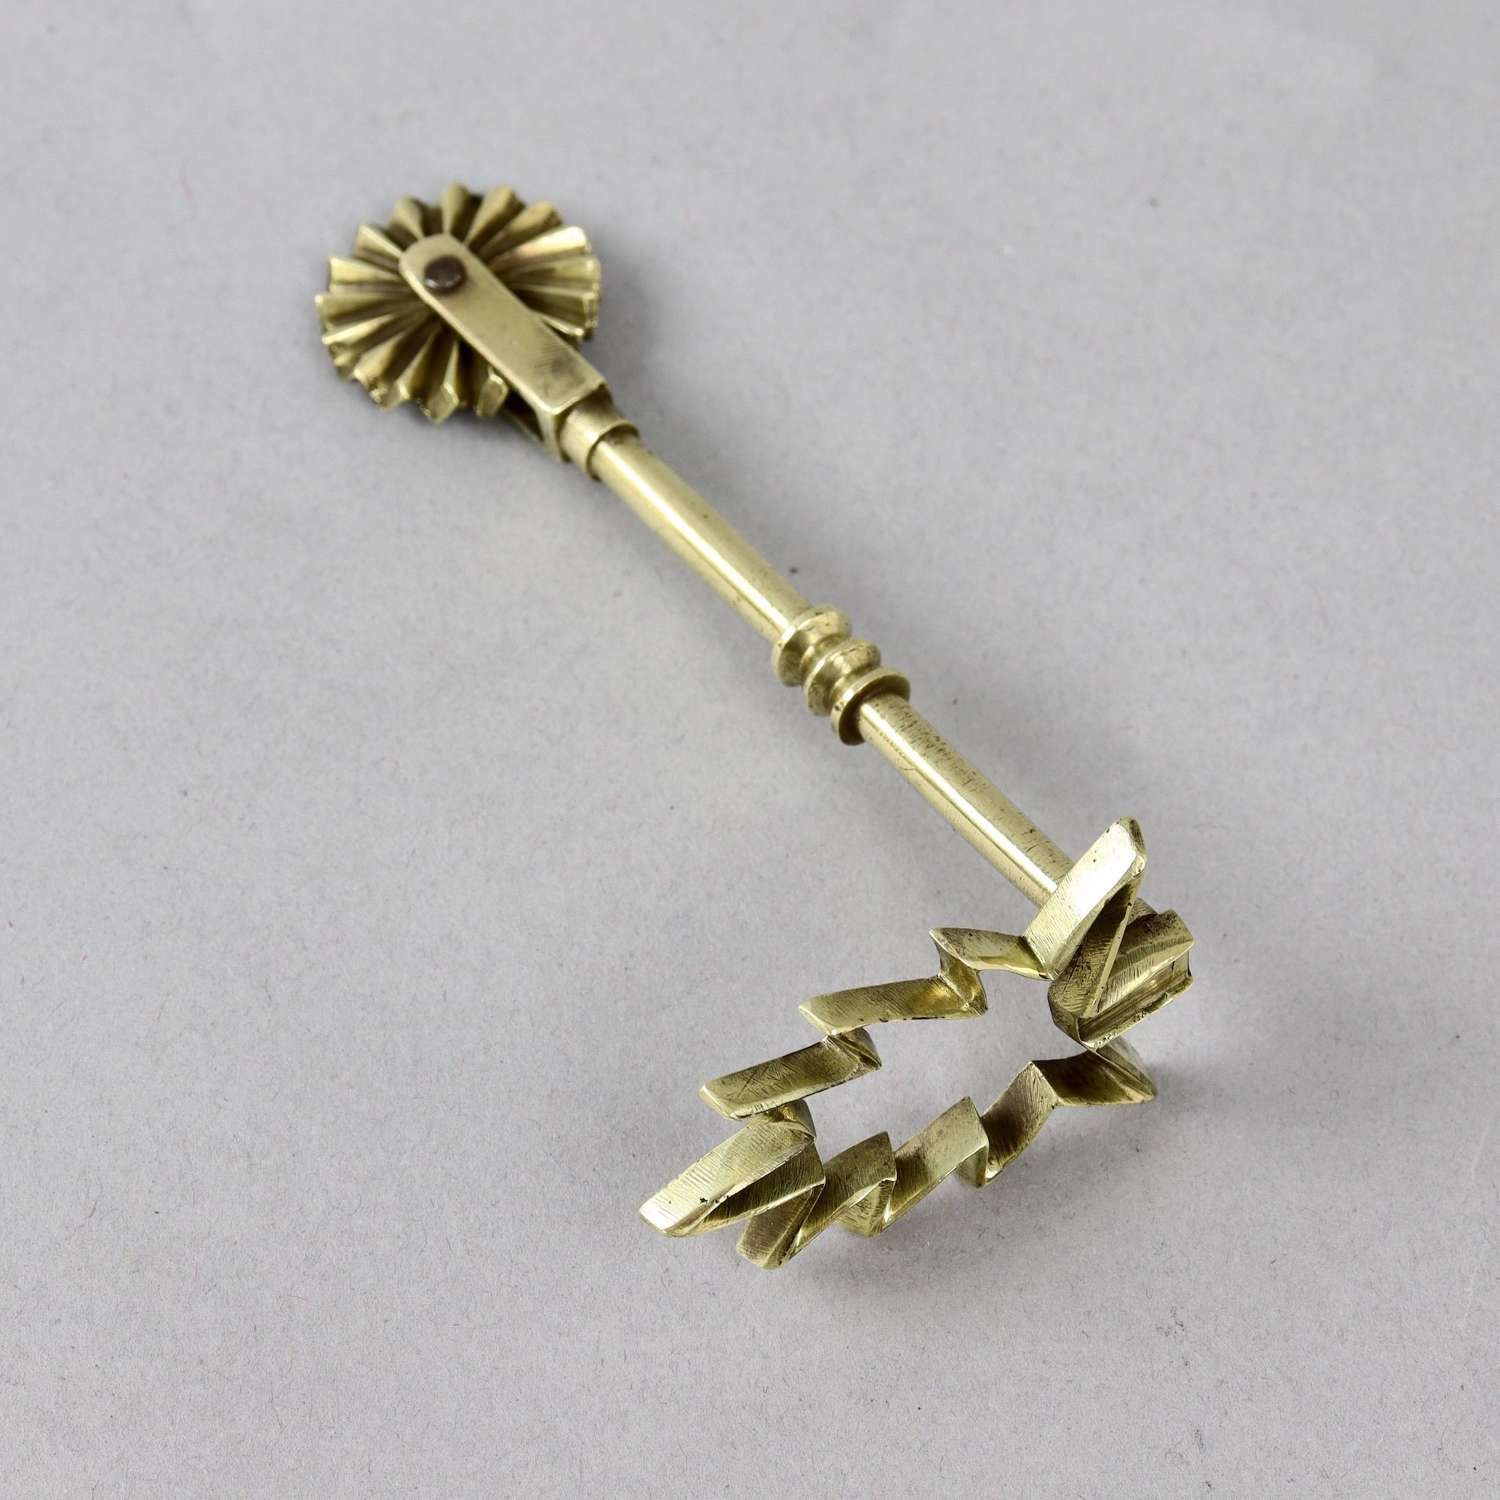 Brass Pastry Tool with Leaf Shaped Cutter